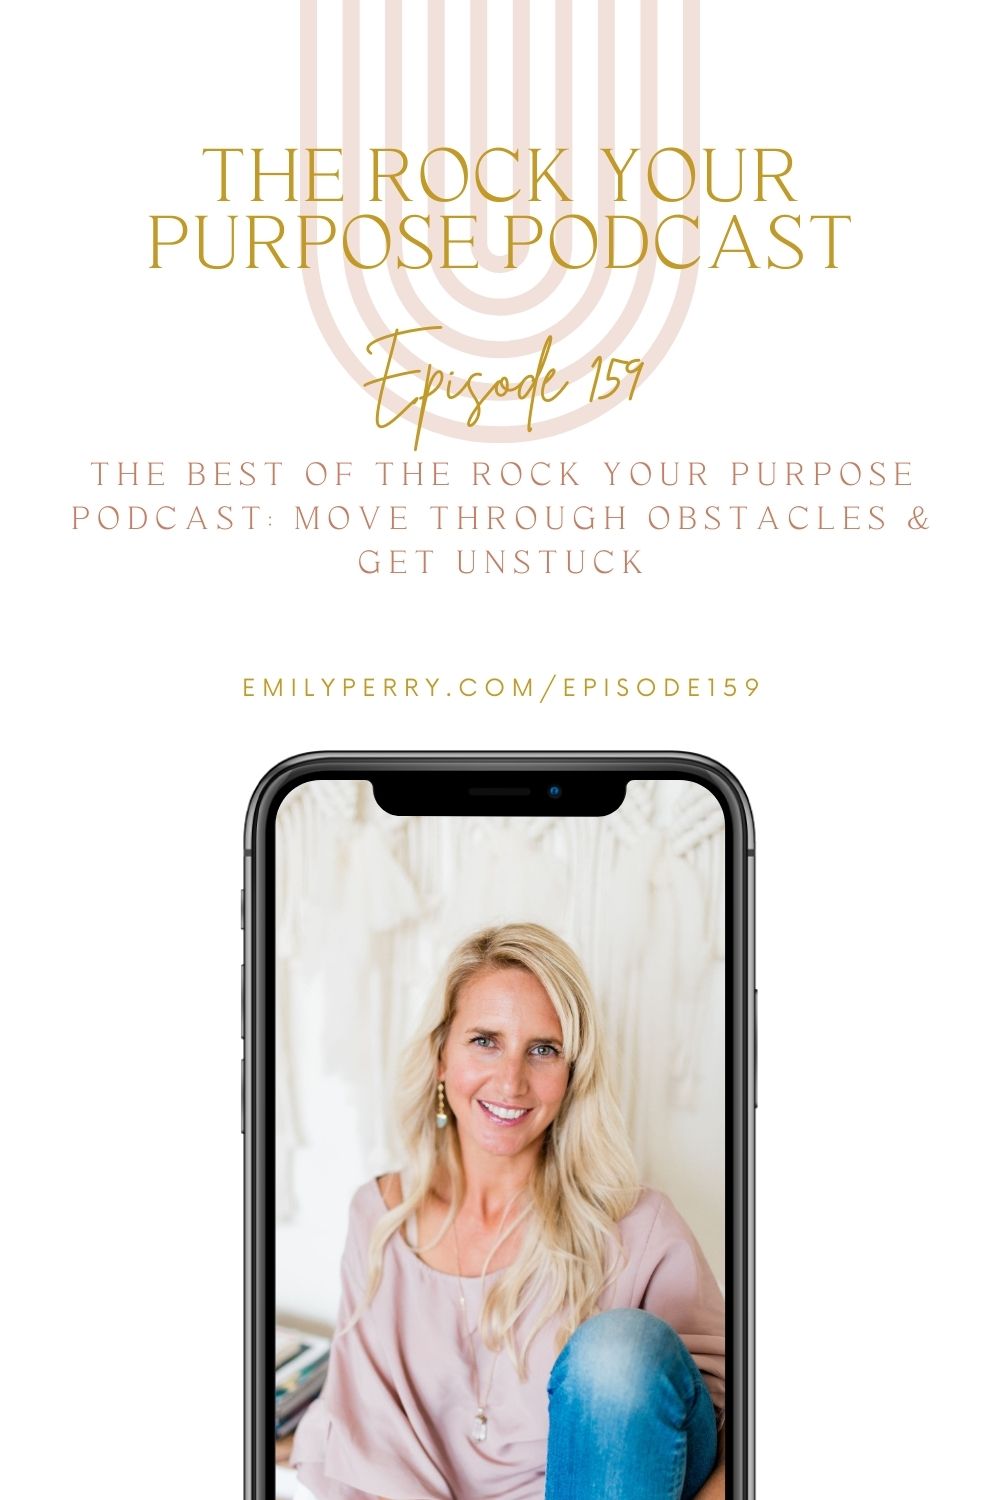 emily perry rock your purpose podcast episode 159 get unstuck move through obstacles spiritual business entrepreneur